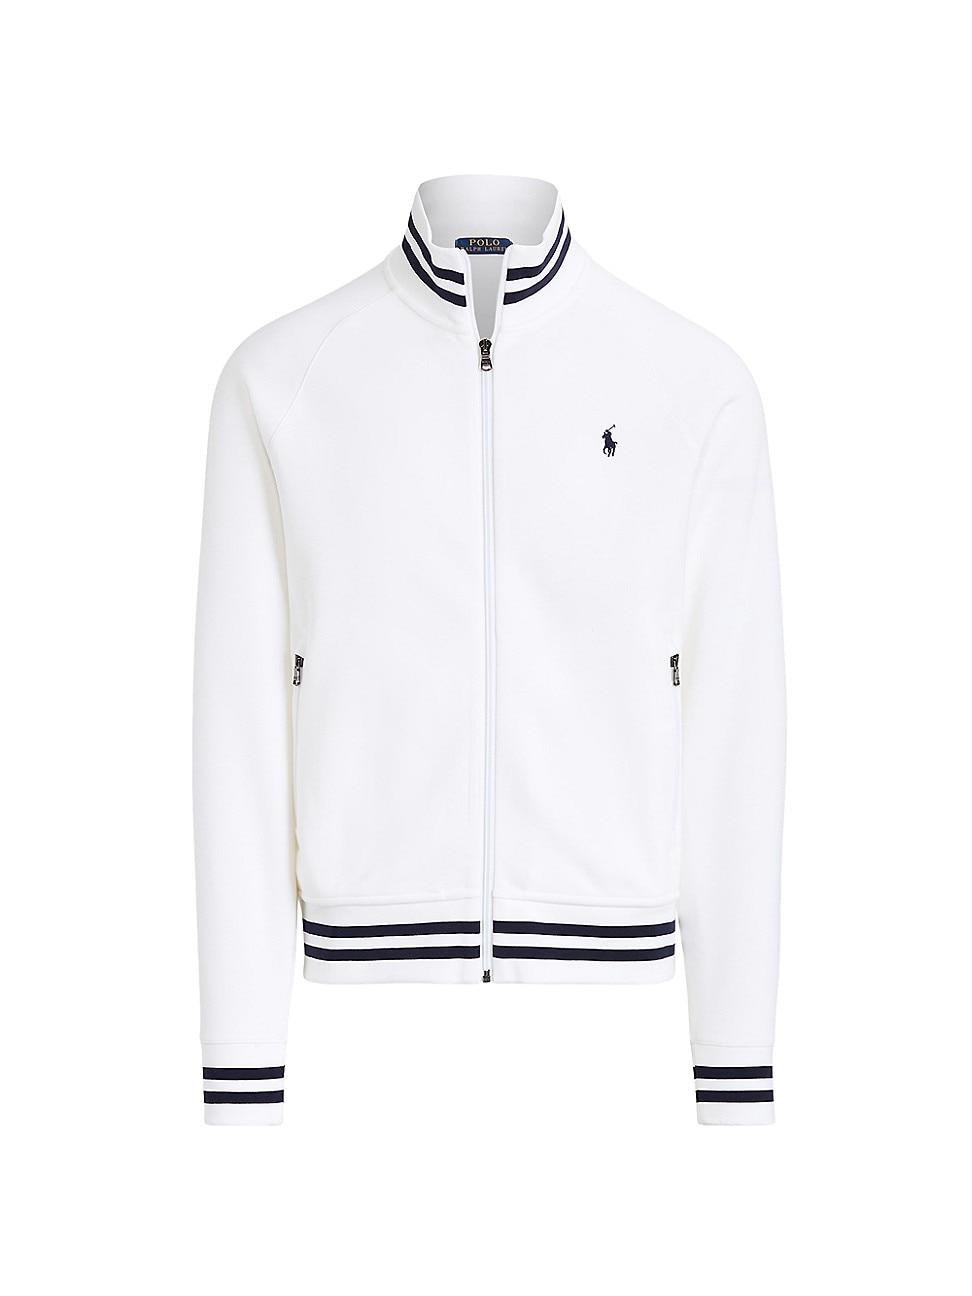 Polo Ralph Lauren Double Knit Track Jacket in White for Men | Lyst